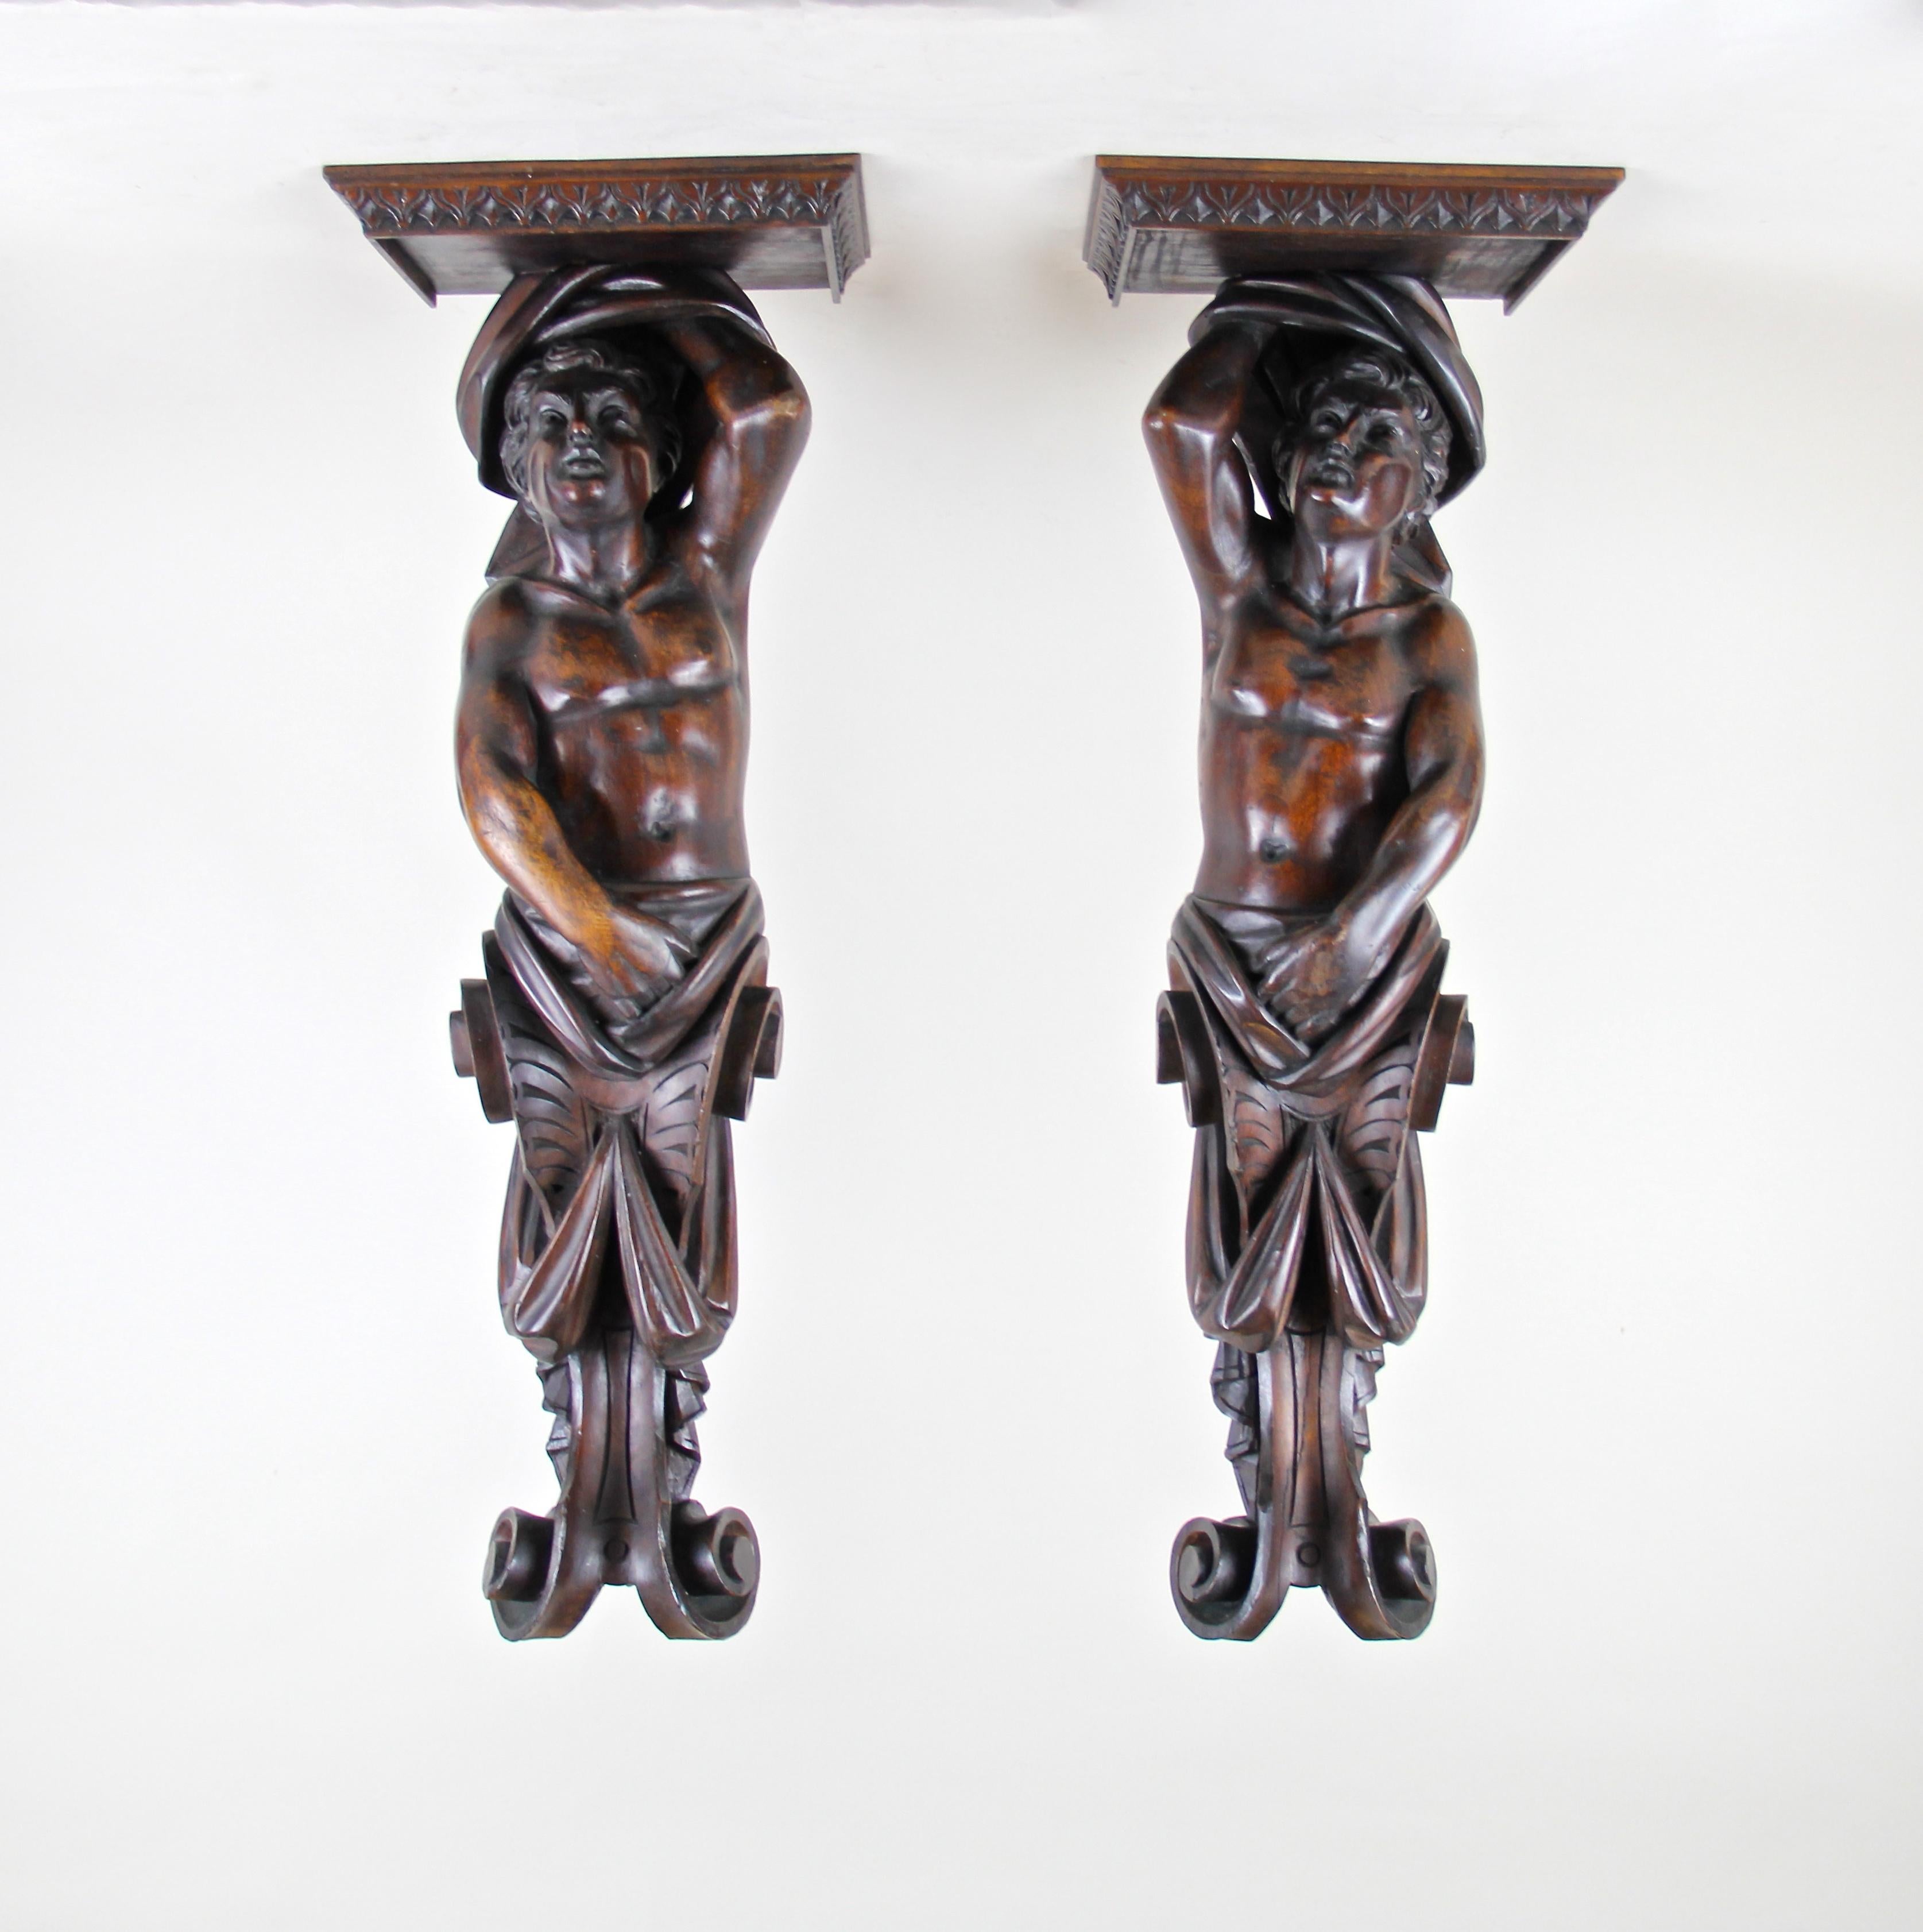 Unusual pair of large figural wall consoles from Austria, circa 1870. By showing real craftsmanship, this fantastic pair was hand carved out of solid nut wood depicting two young athletic men carrying the top plate of these rare wall console tables.